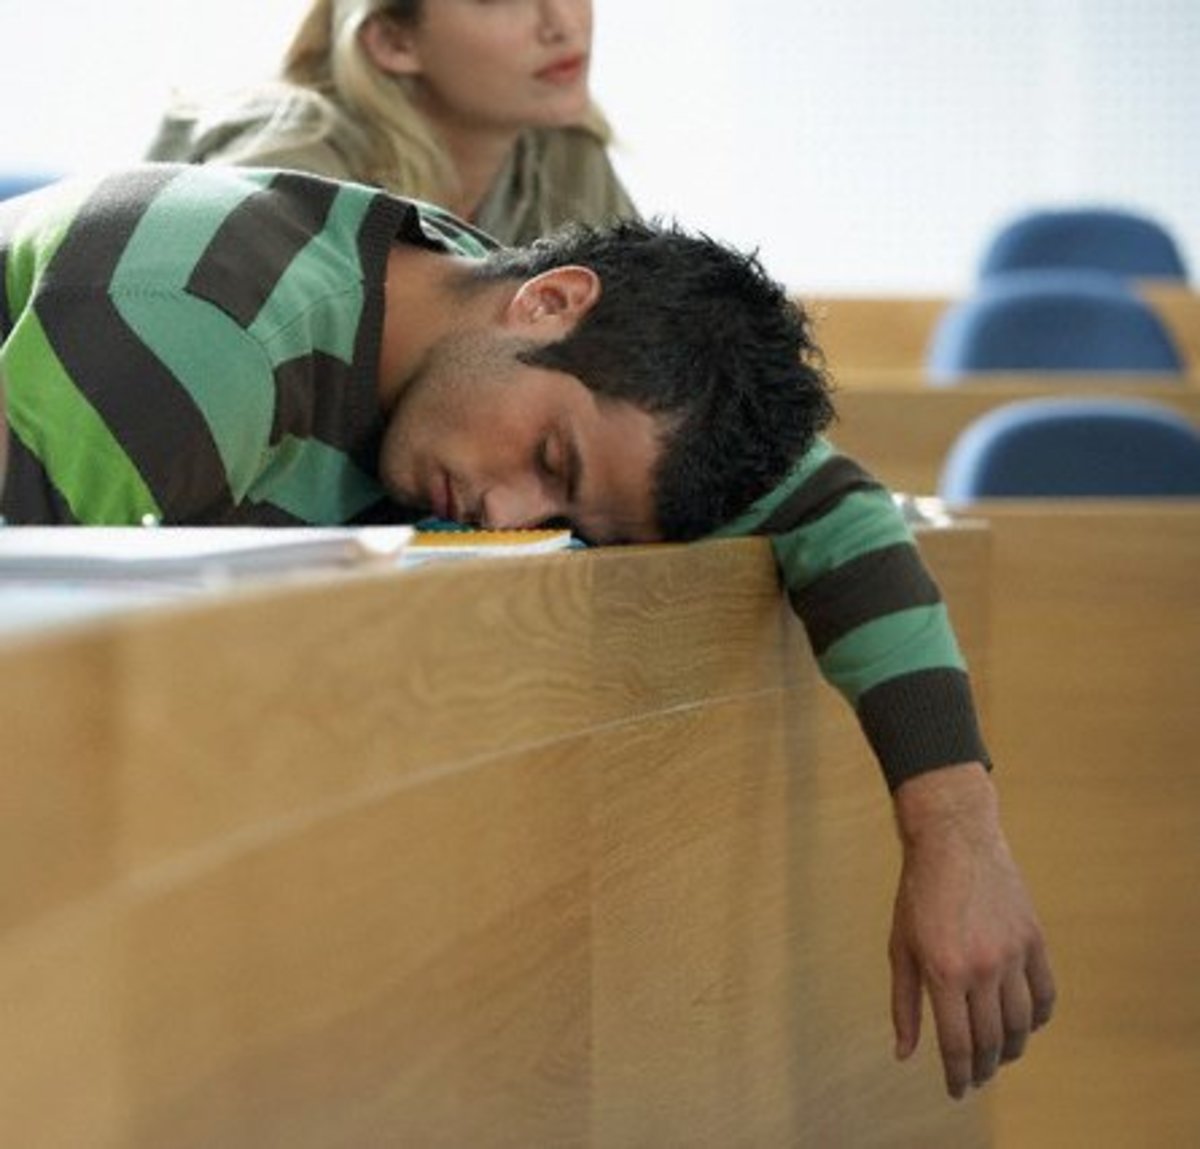 Do you think this student got much out of the lecture?